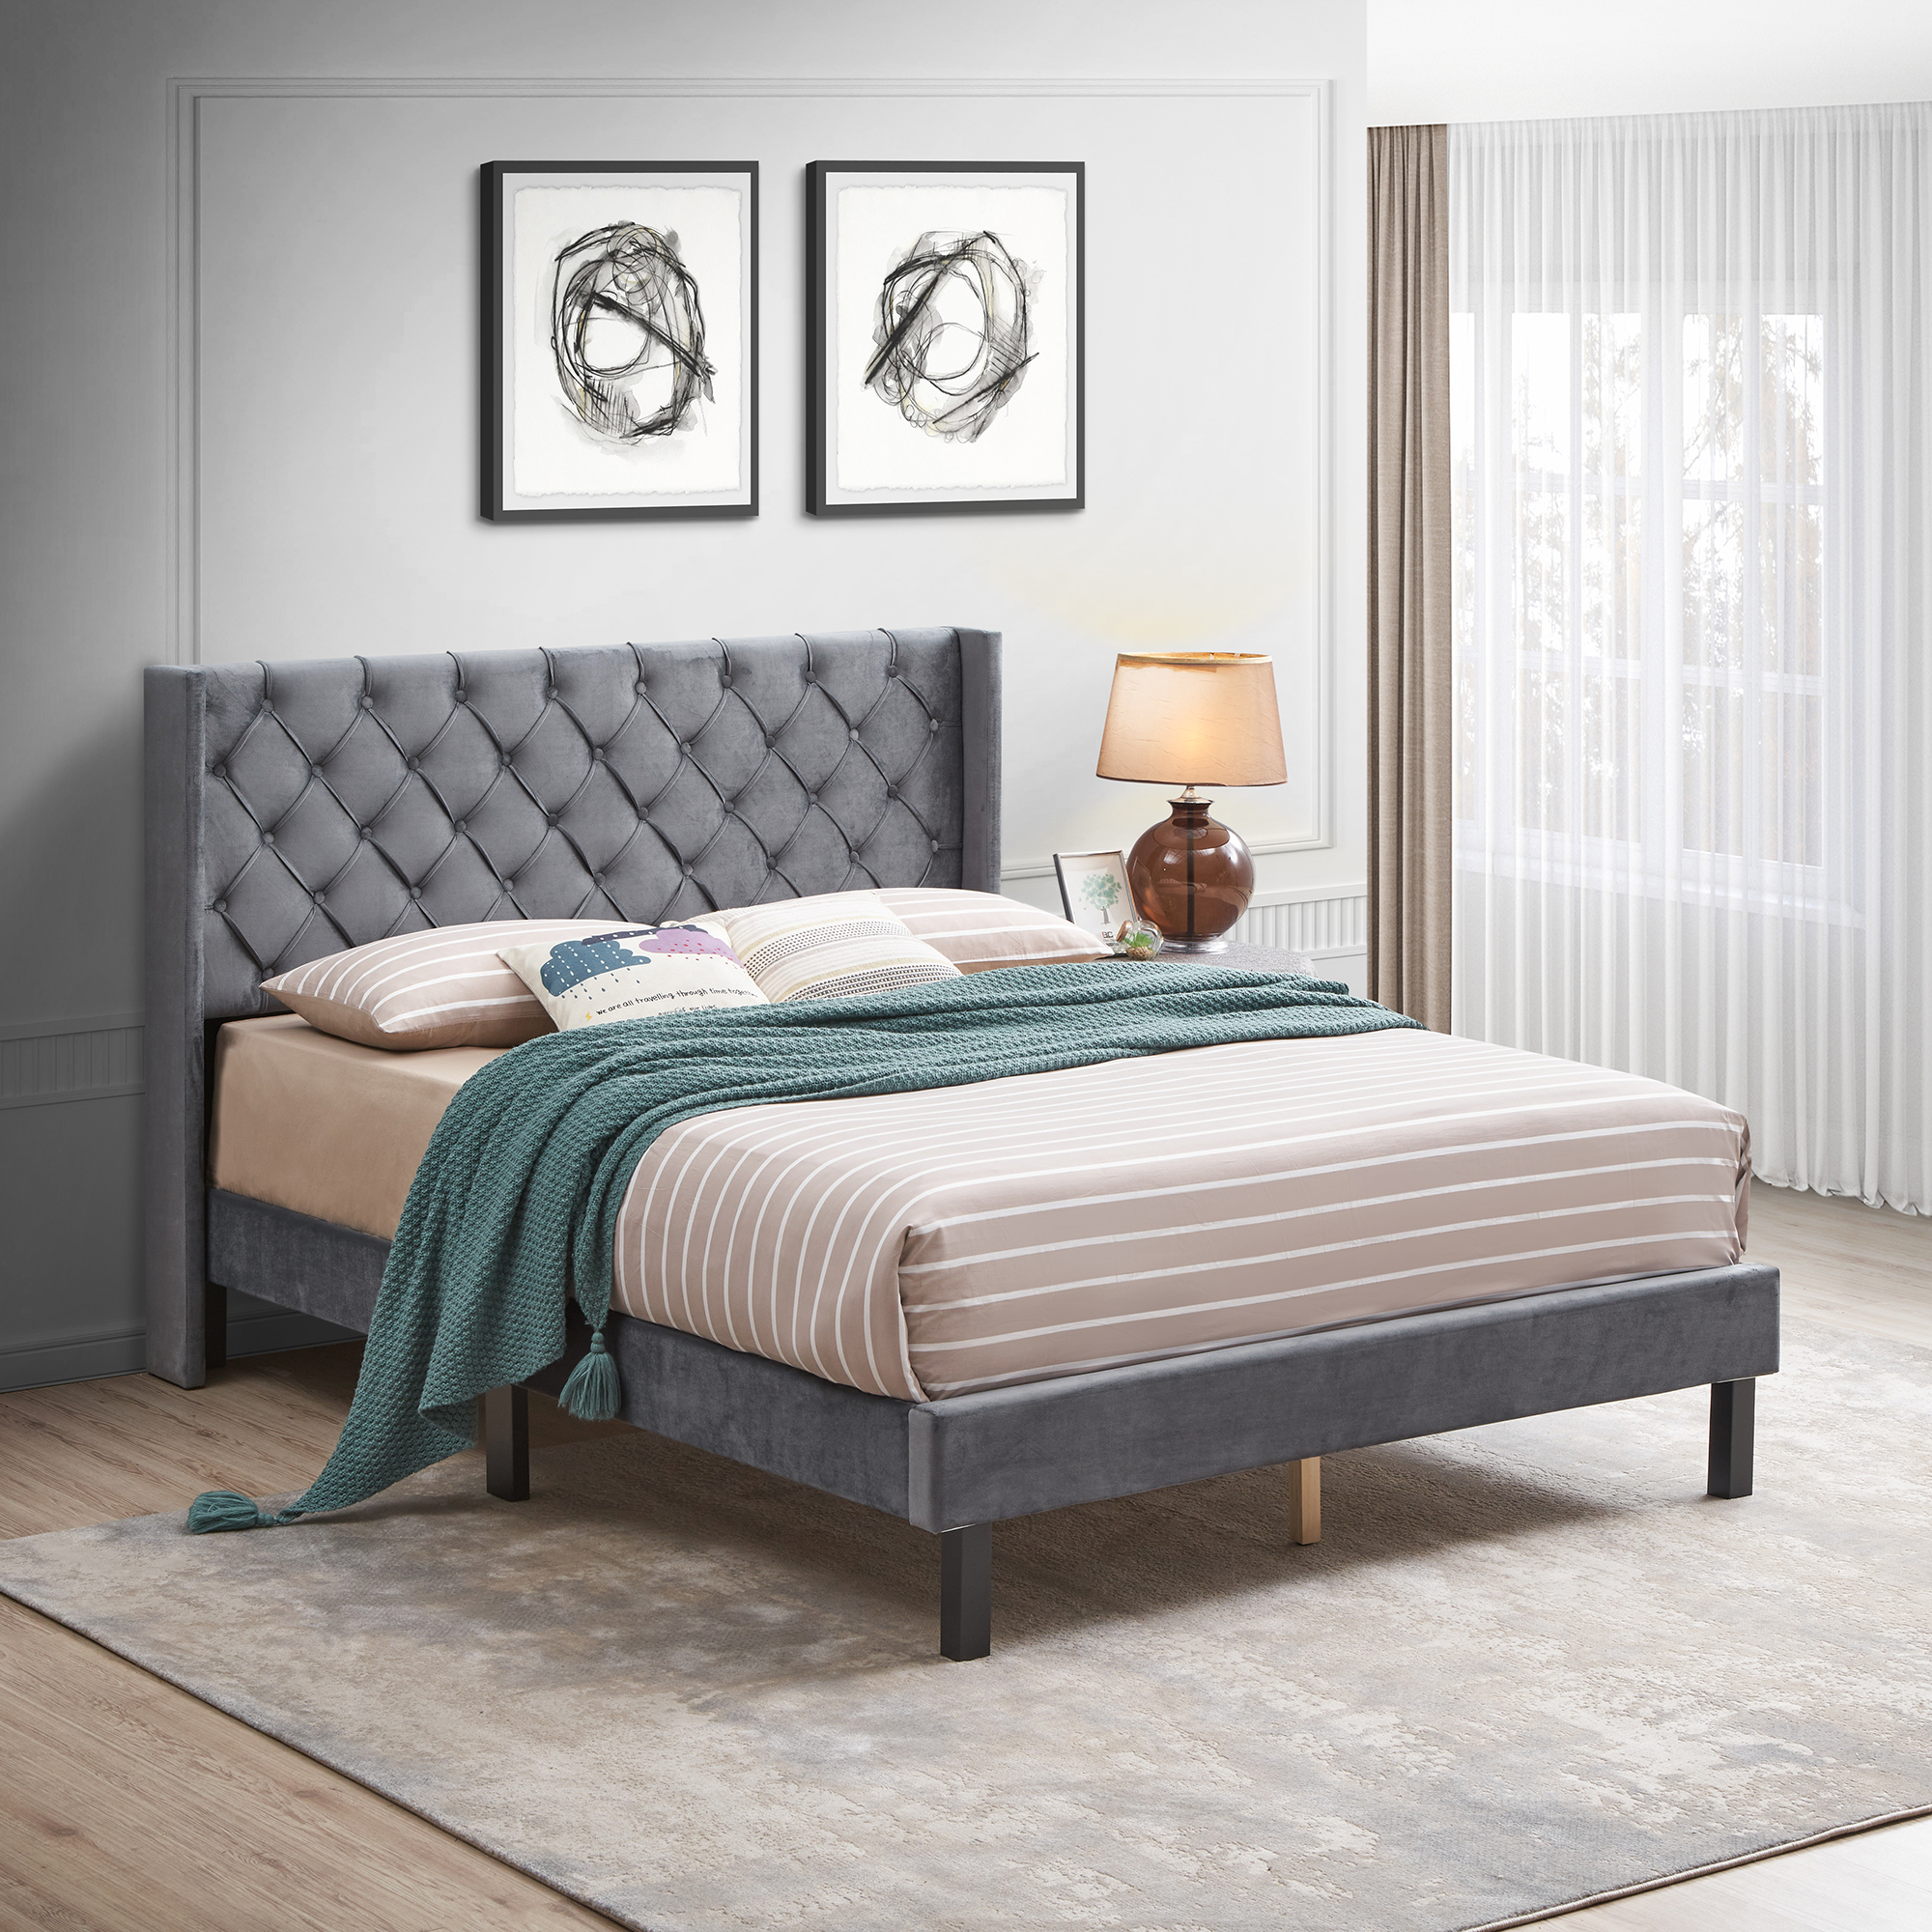 Velvet Button Tufted-Upholstered Bed with Wings Design - Strong Wood Slat Support&nbsp;- Easy Assembly - Gray, Queen, platform bed-CASAINC